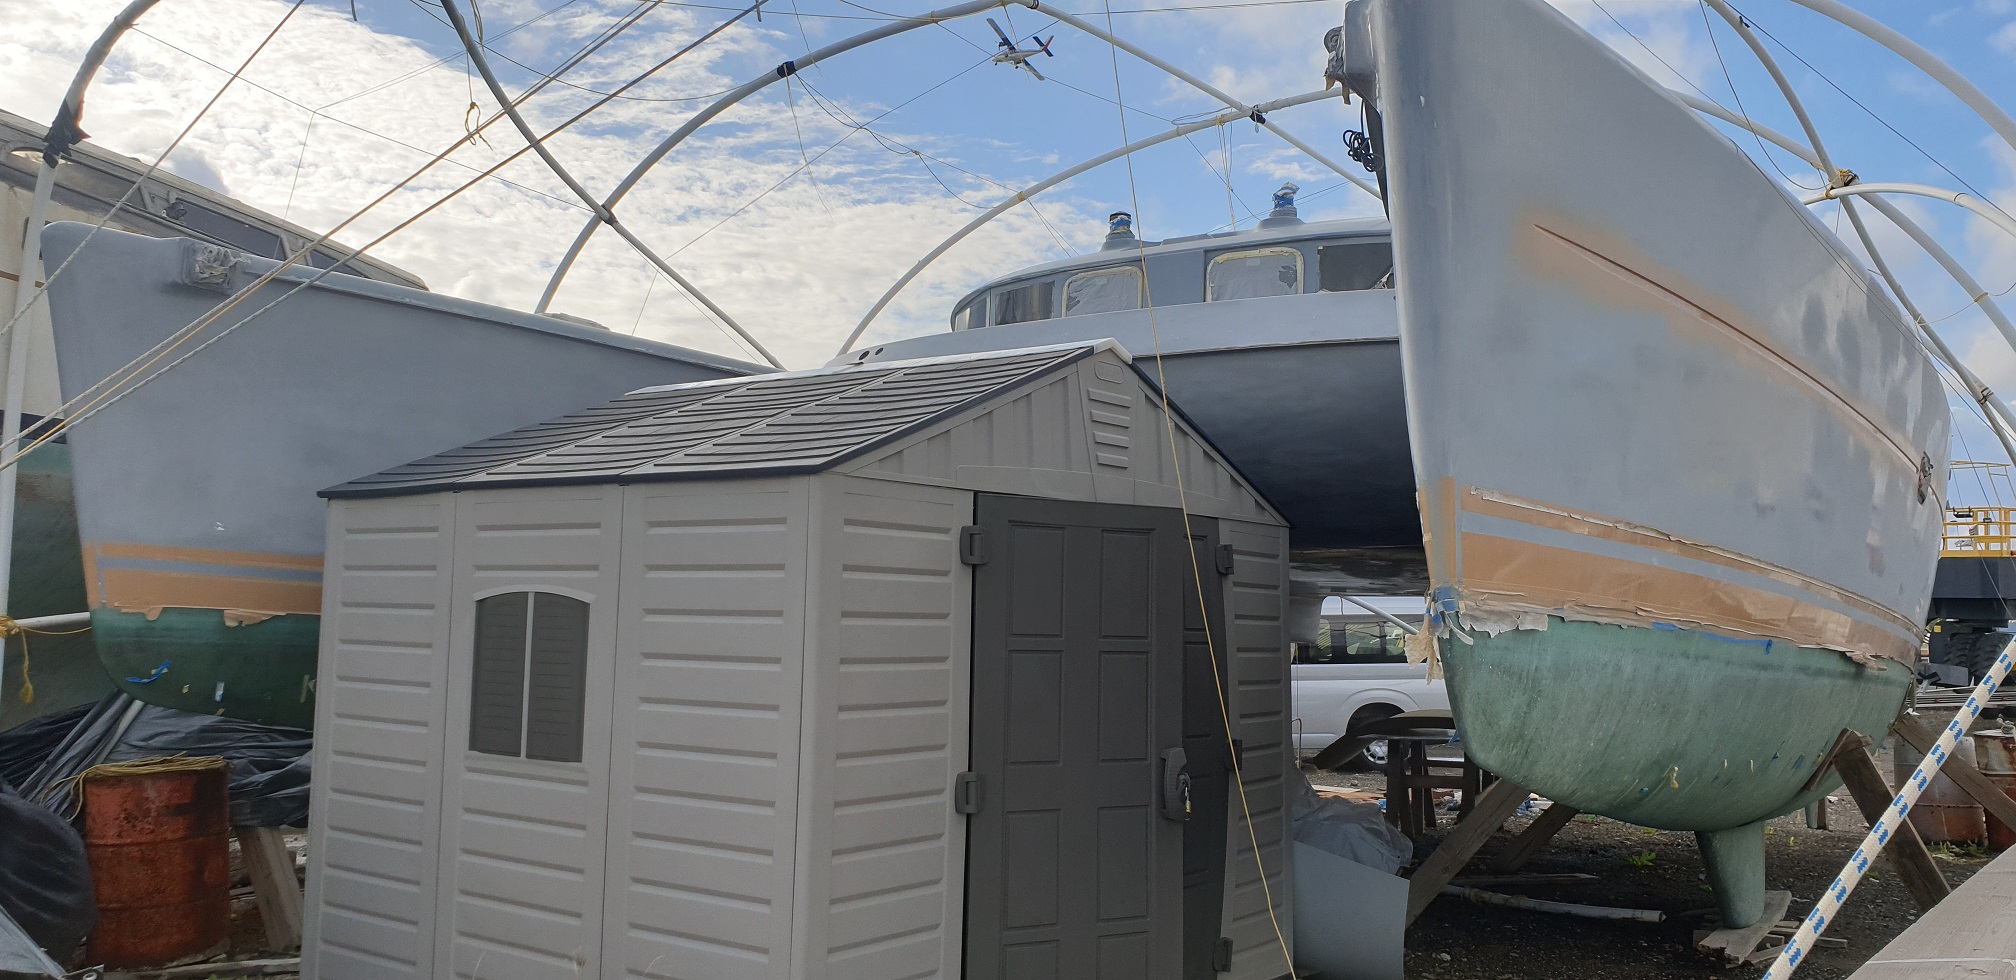 Dive Center For Sale - Was $279.000 now $195000 Partnership/finance available (little damage during hurricane Irma about 25K to do after owner paints her in Awlgrip). Very well establish Catamaran Sail and Dive liveaboard in the BVI for sale LIVING THE DREAM :-)